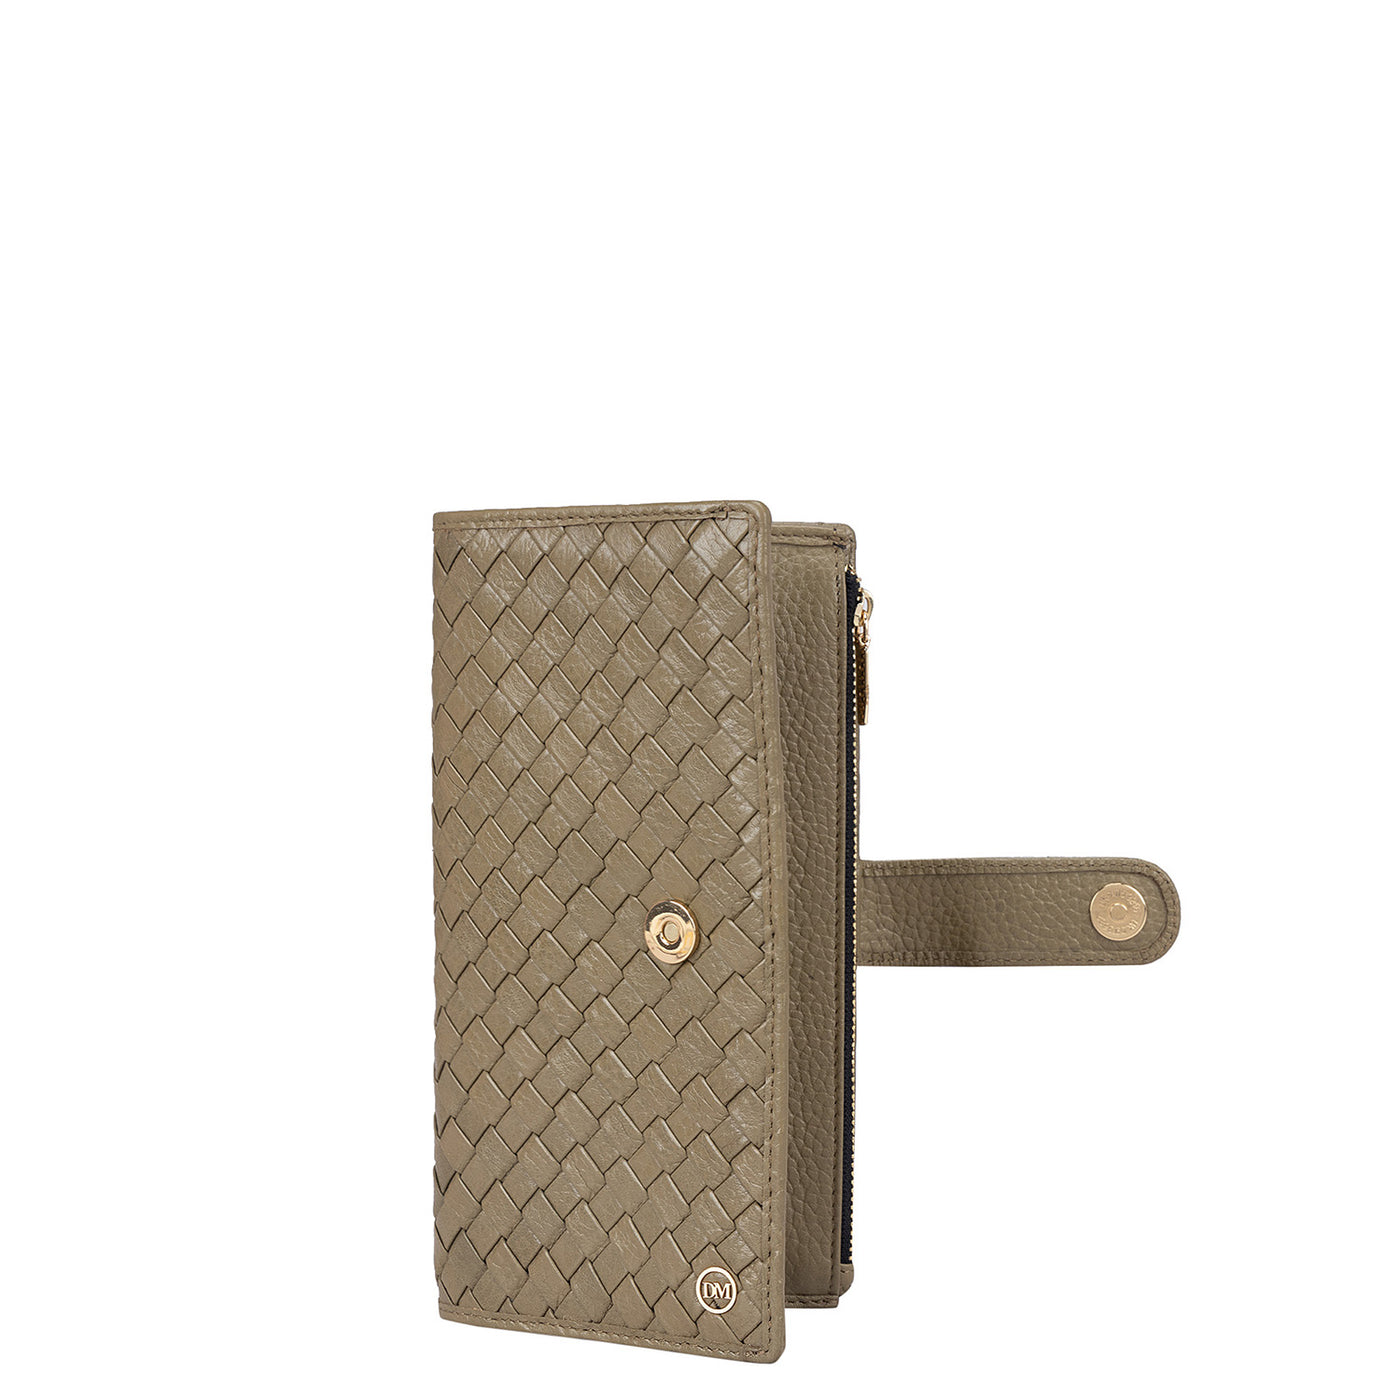 Mat Leather Ladies Wallet - Olive